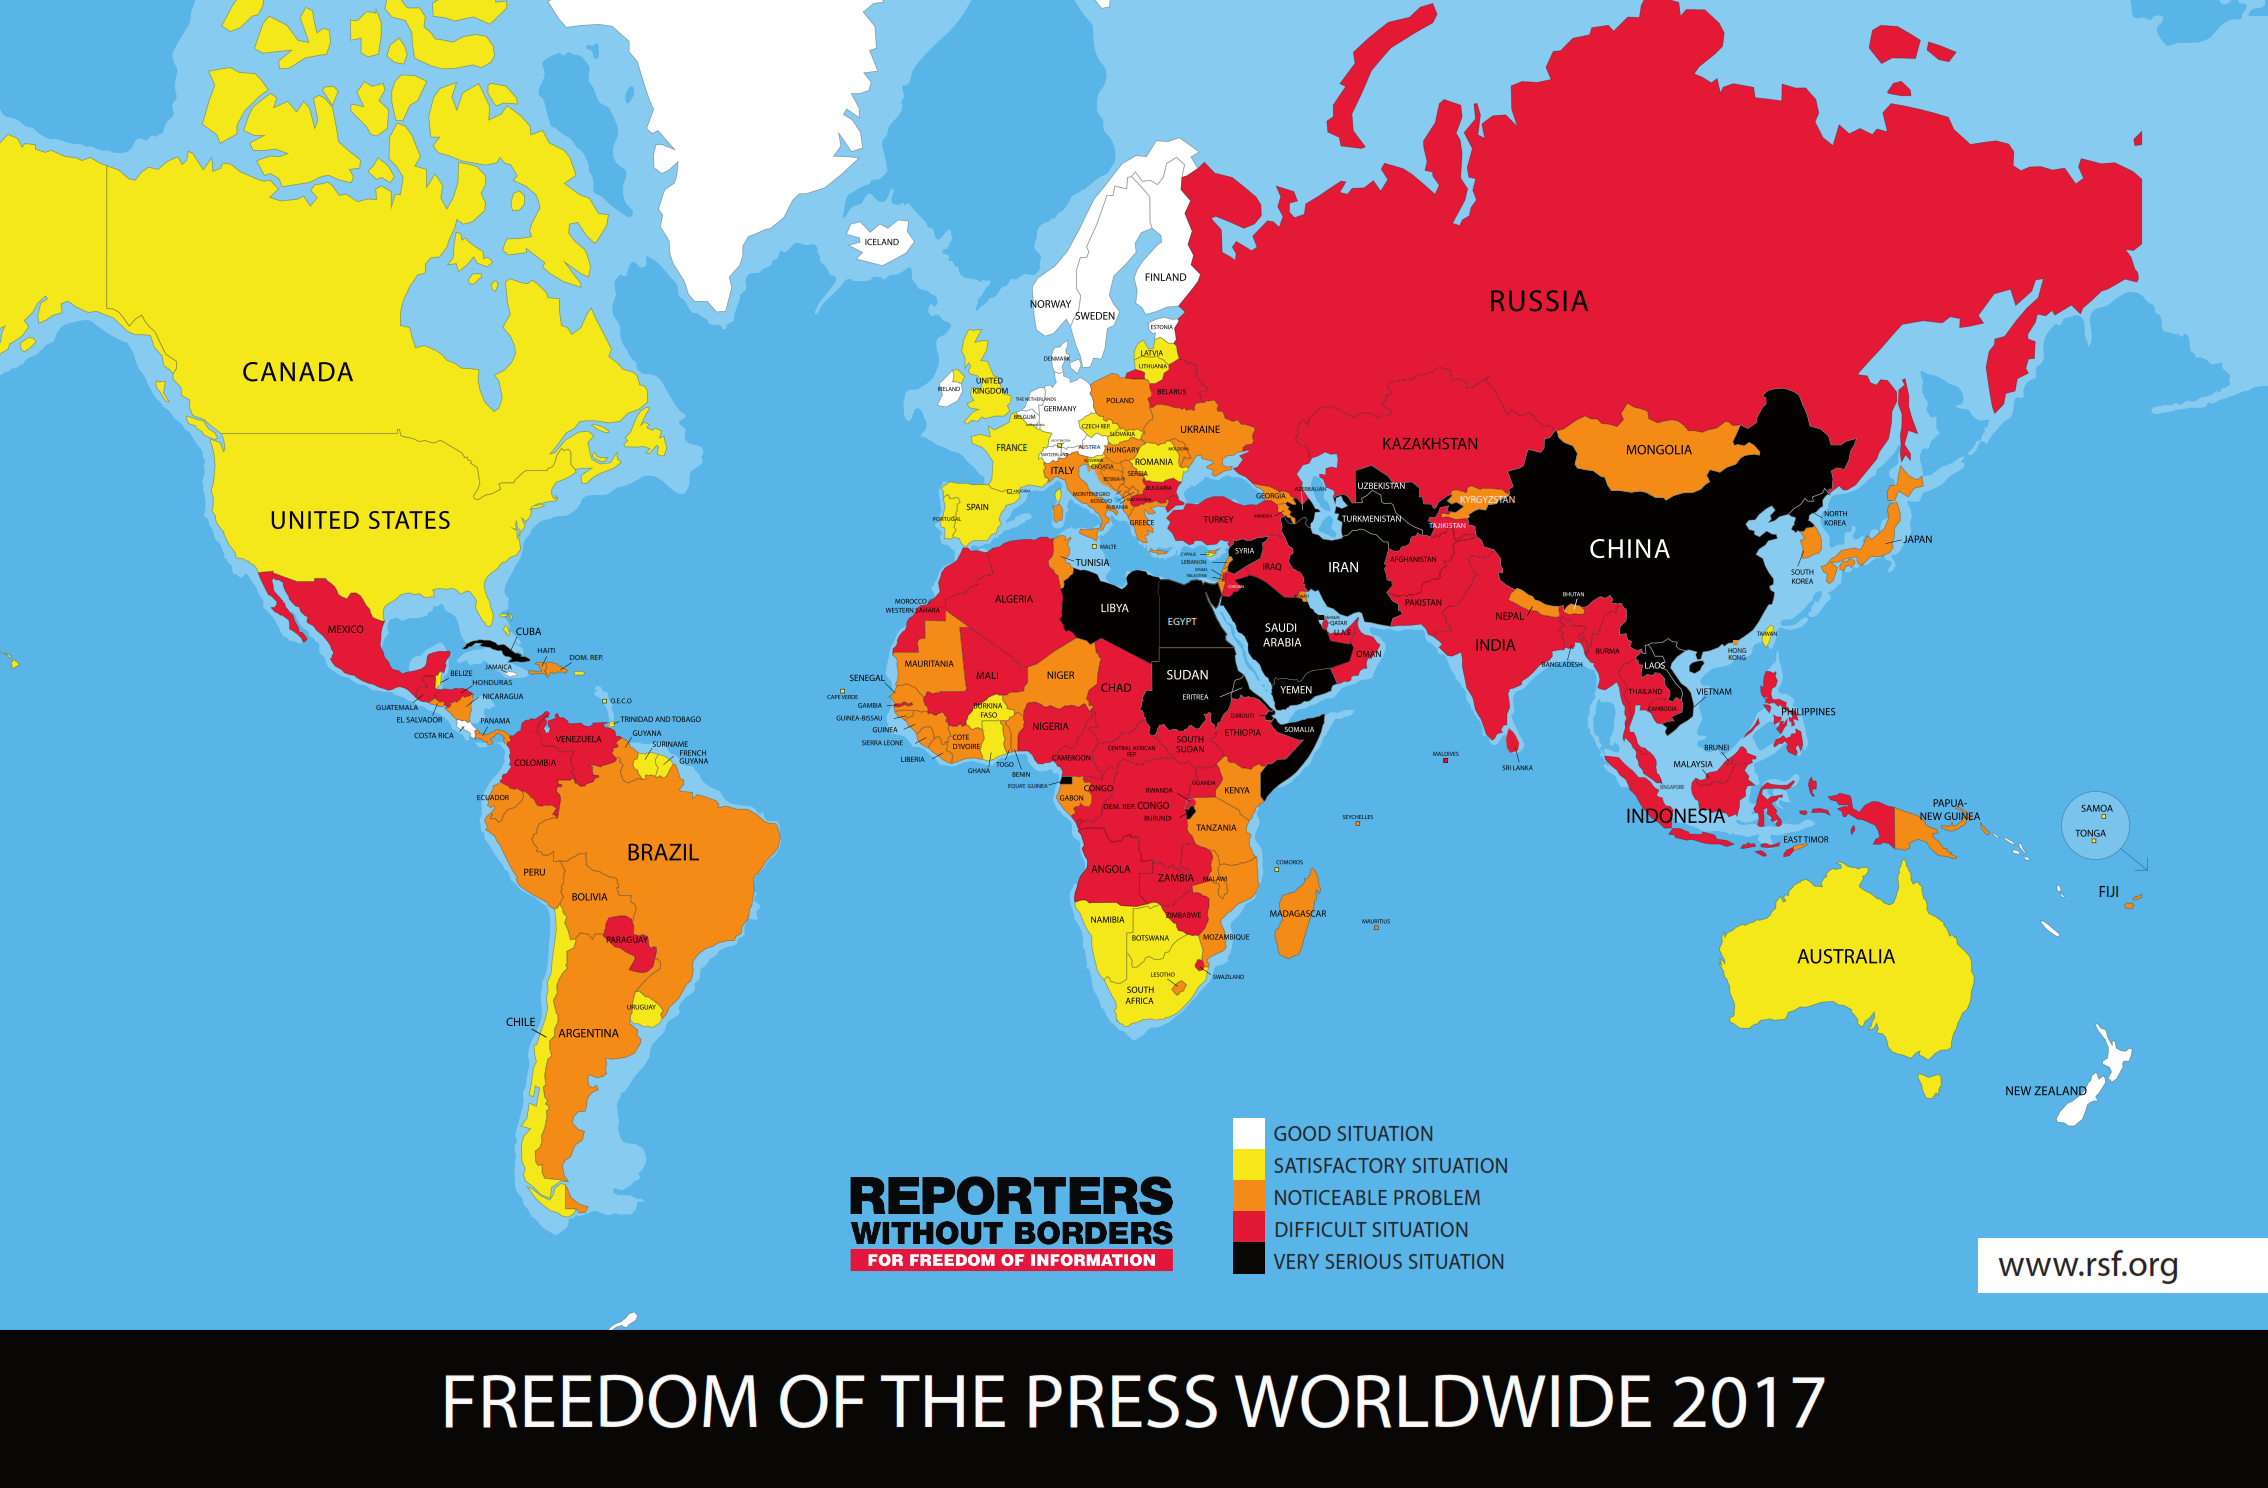 Poland continues plummet in Press Freedom Index | The Krakow Post